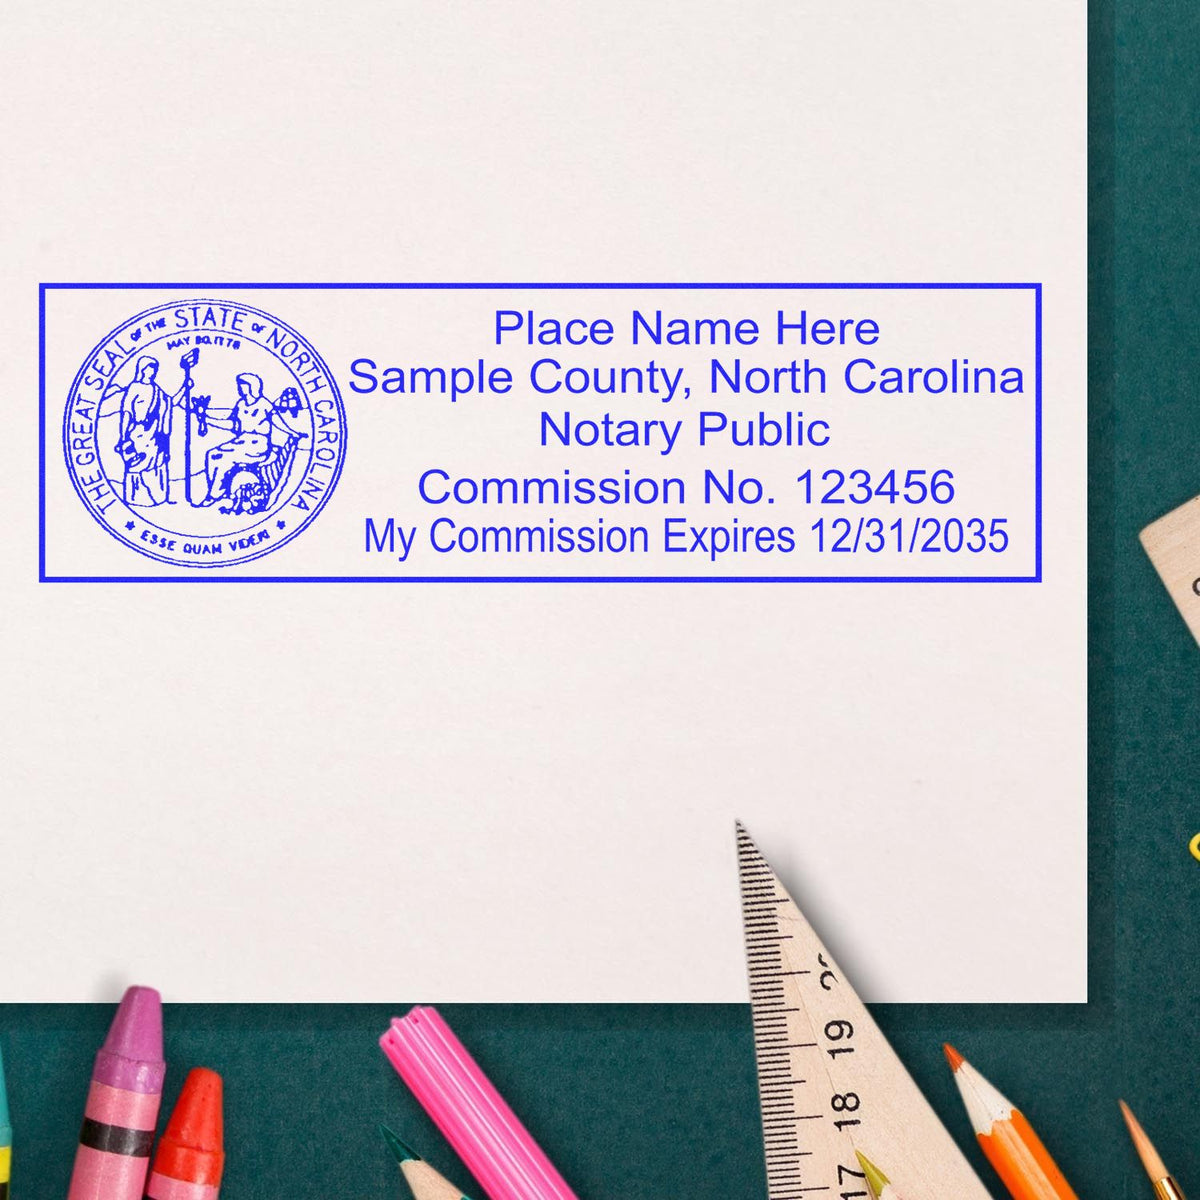 An alternative view of the Heavy-Duty North Carolina Rectangular Notary Stamp stamped on a sheet of paper showing the image in use